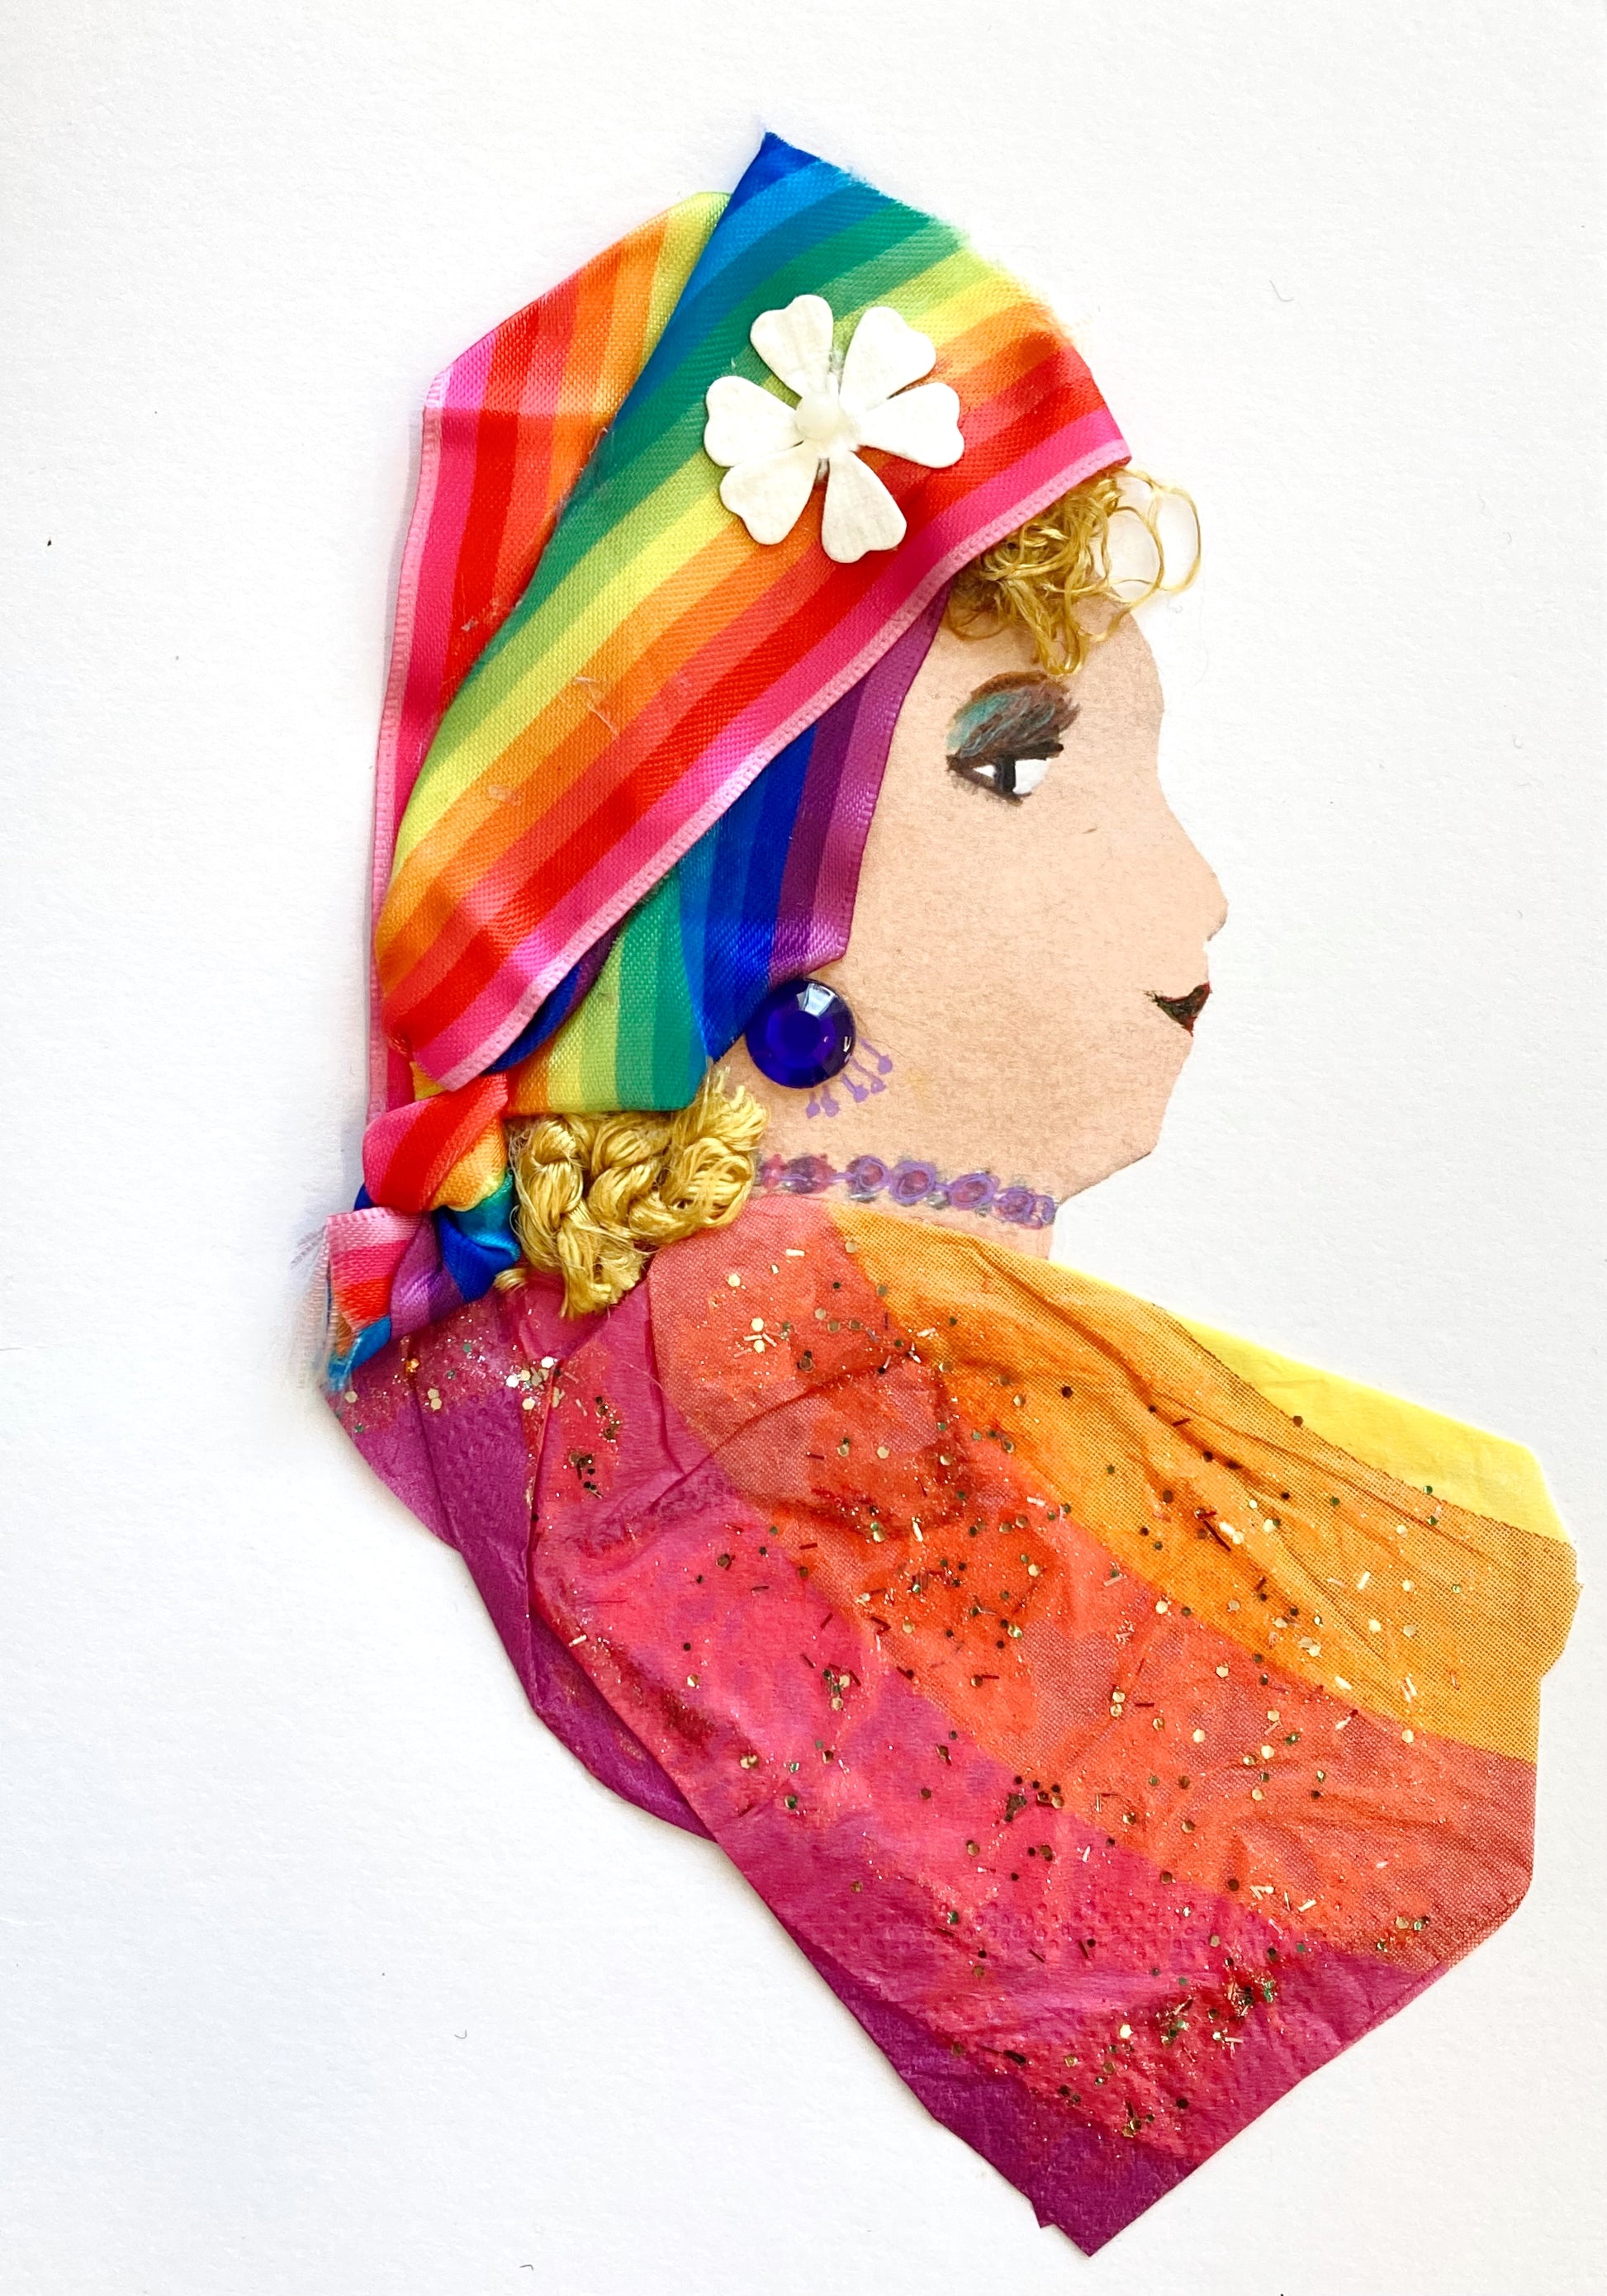 This card is called Kaleidoscopic. She wears a rainbow tissue paper blouse, and a rainbow printed ribbon in her curly blonde hair. She wears a white flower on her headscarf, and a blue earring the same tone as the rainbow. 